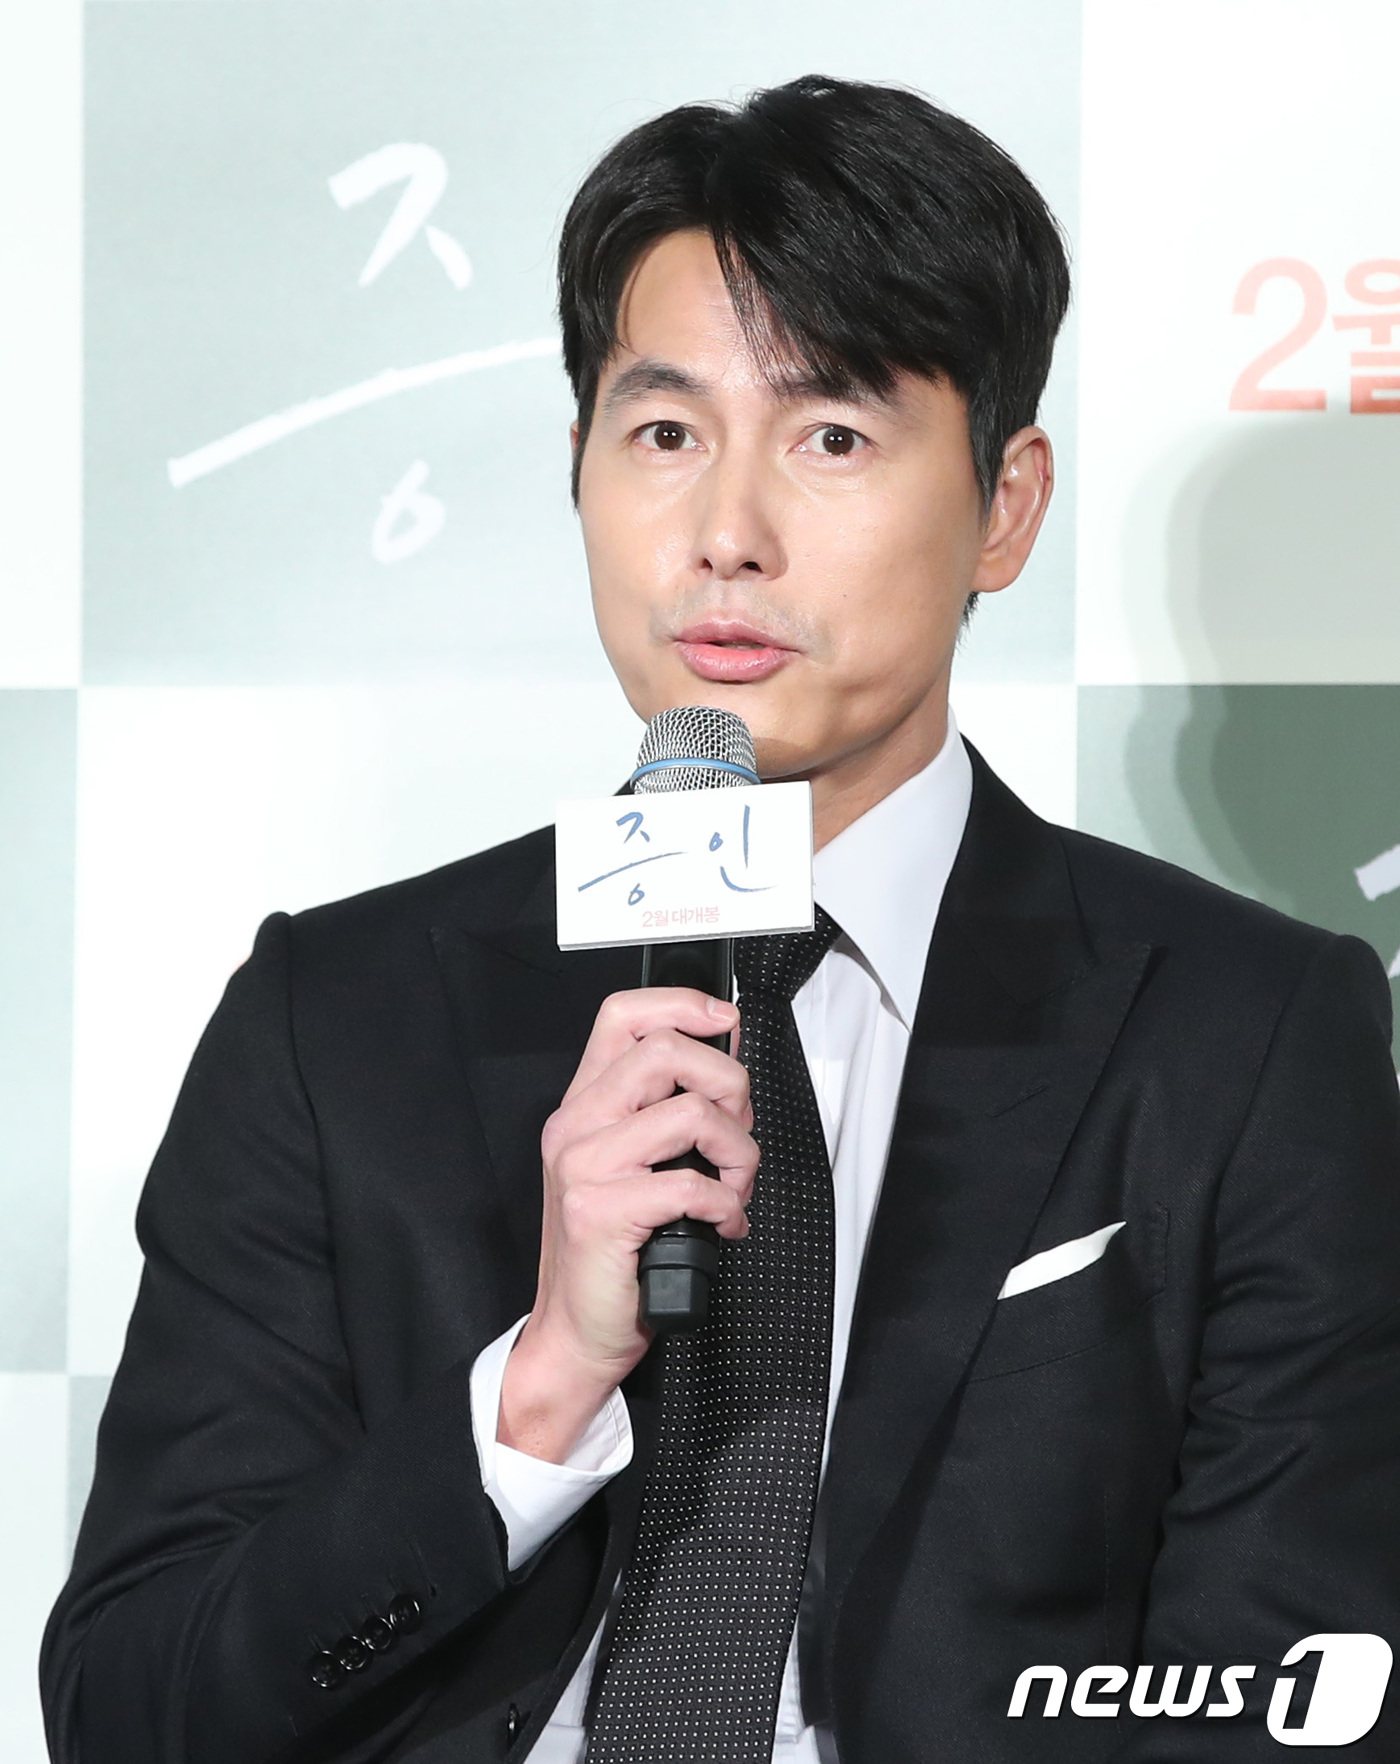 Jung Woo-sung recalled the first time he read the scenario of this movie at the media distribution preview of the movie Innocent Witness (director Lee Han) at the entrance of Lotte Cinema Counter in Seoul on the 21st, saying, The feelings that Ji-woo and Sunho share, and the feelings that I share with my father were so warm.I felt that warmth for a long time and felt like I was healed when I covered the scenario. That was probably contrary to the characters in the works I have been working on over the past few years.I think it was a scenario that I could afford to take care of myself from the inside, so I felt like that. When I covered the scenario, I felt like I wanted to shoot right away.I wanted to feel and express the feelings I felt while reading the scenario while meeting Ji-woo on the set. Innocent Witness depicted what happened when a large law firm lawyer Sunho, who was supposed to be a snob for reality, was identified as a lawyer in a murder case that had the opportunity to be promoted to a partner lawyer, and met an autistic girl, the only witness to the case.Actor Jung Woo-sung played the role of lawyer Sun Ho who must prove the innocence of the leading The Suspect, and Kim Hyang Gi played the role of Ji-woo, the autistic girl who is the only witness to the case.Lee Gyu-hyung played the role of the prosecutor in charge of the case, Yeom Hye-ran played the role of The Suspect Miran in the case, Jang Young-nam played the mother of Ji-woo, and Park Geun-hyung played the old friend Su-in of Sunho.Meanwhile, Innocent Witness will be released on February 13th.